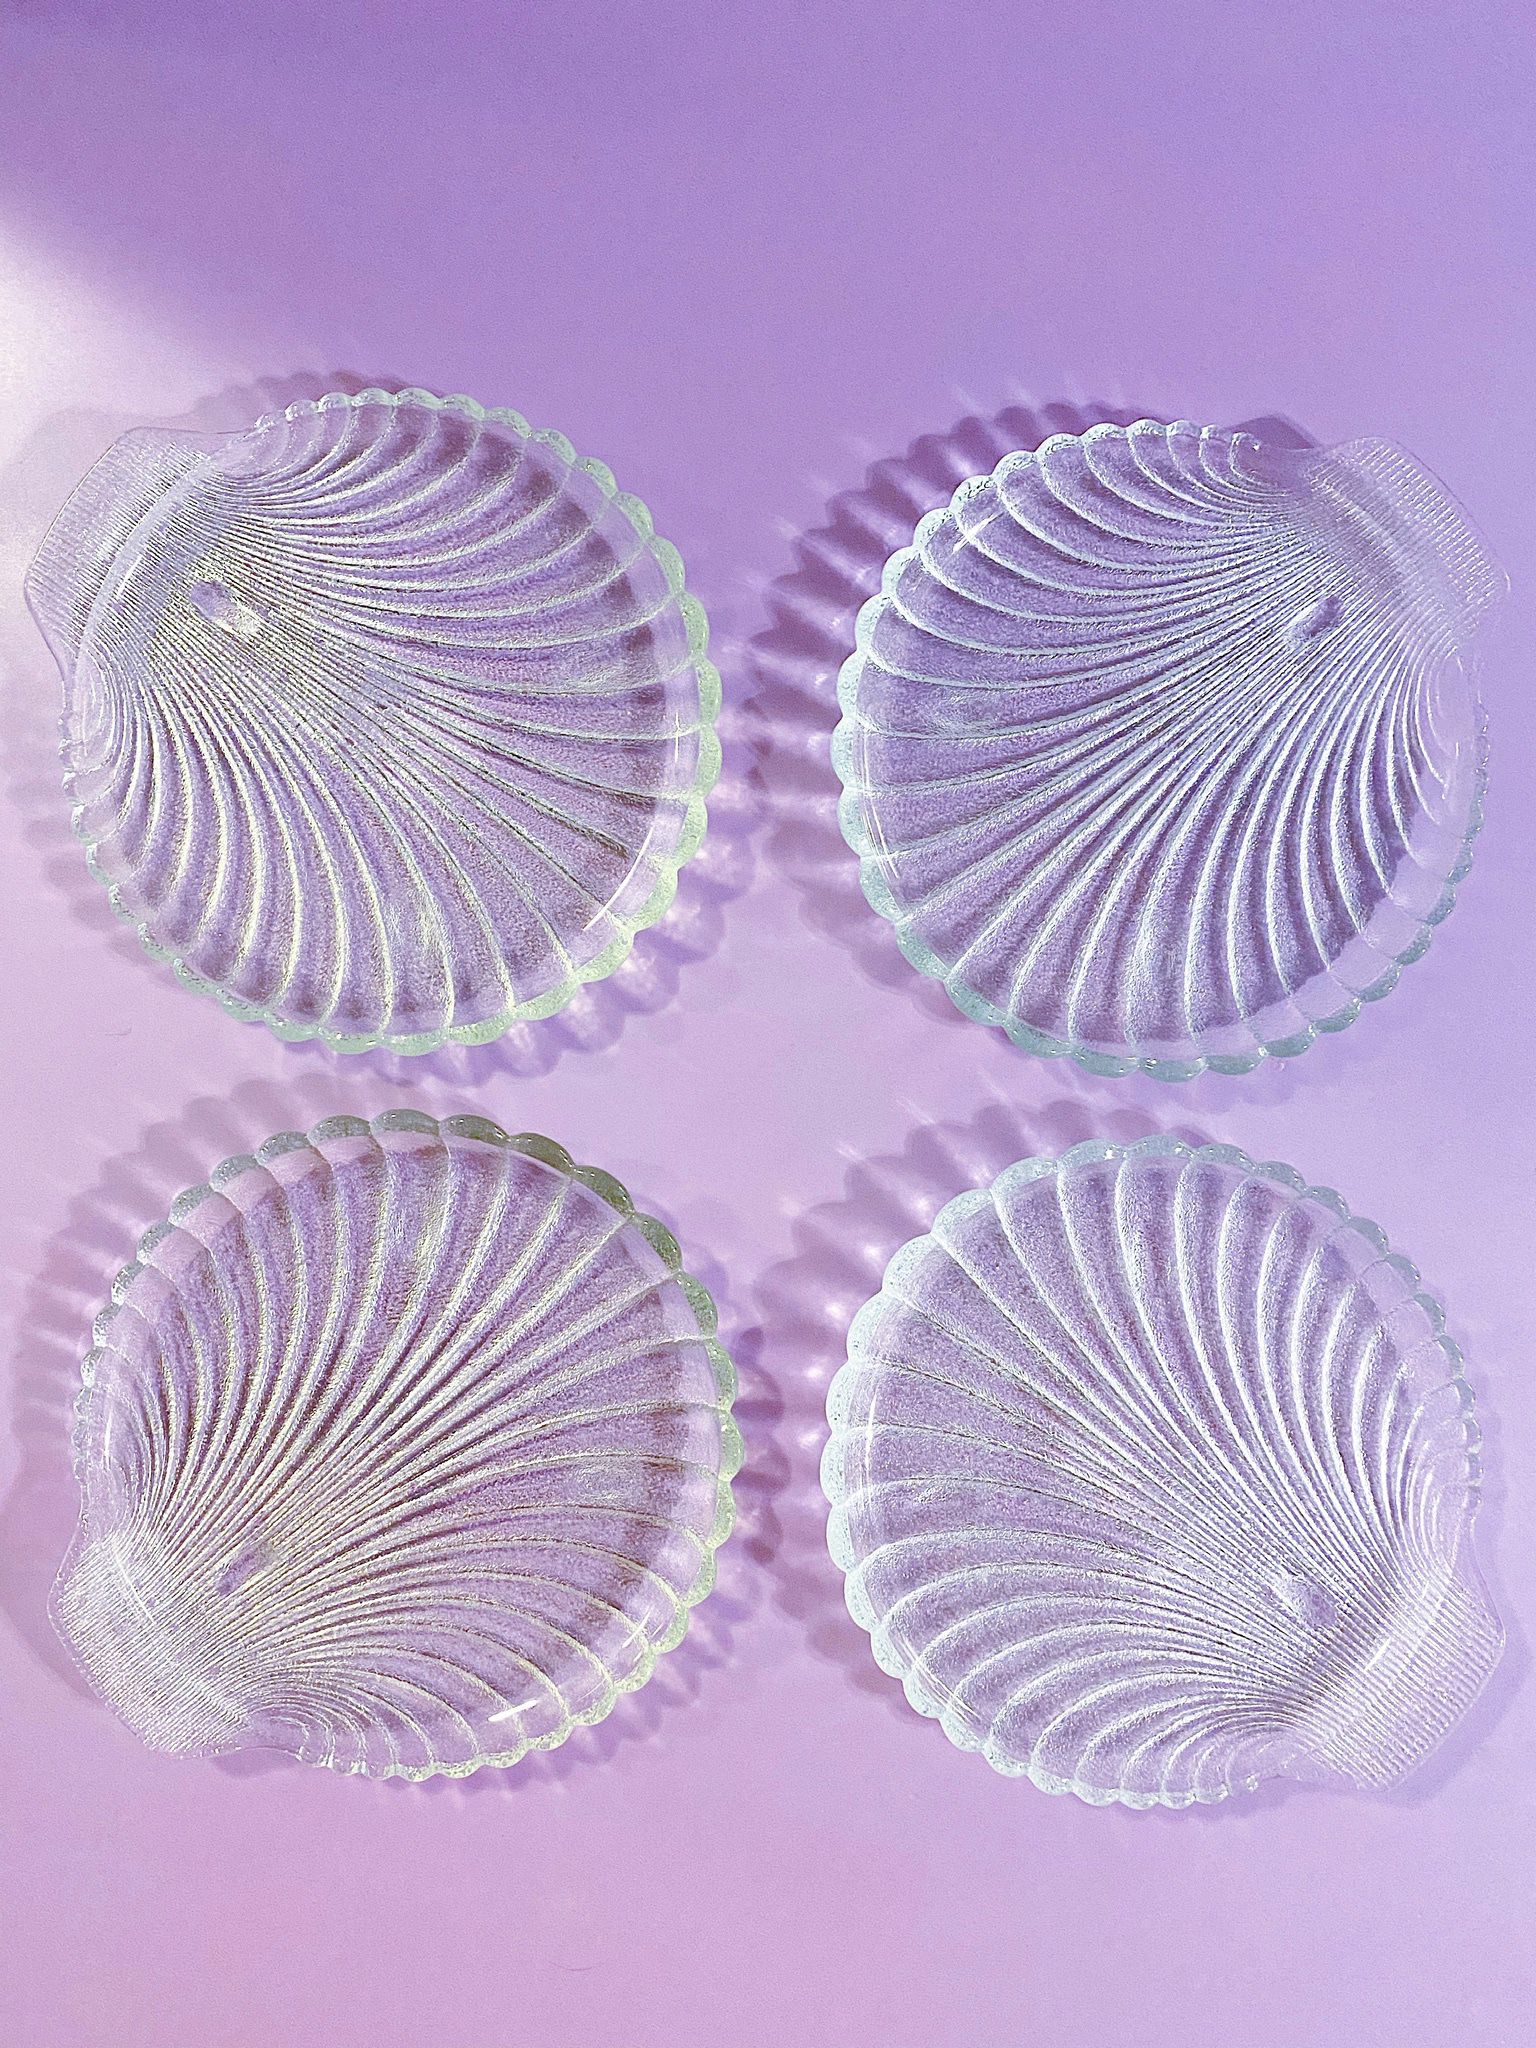 Frosted Glass Seashell Plates